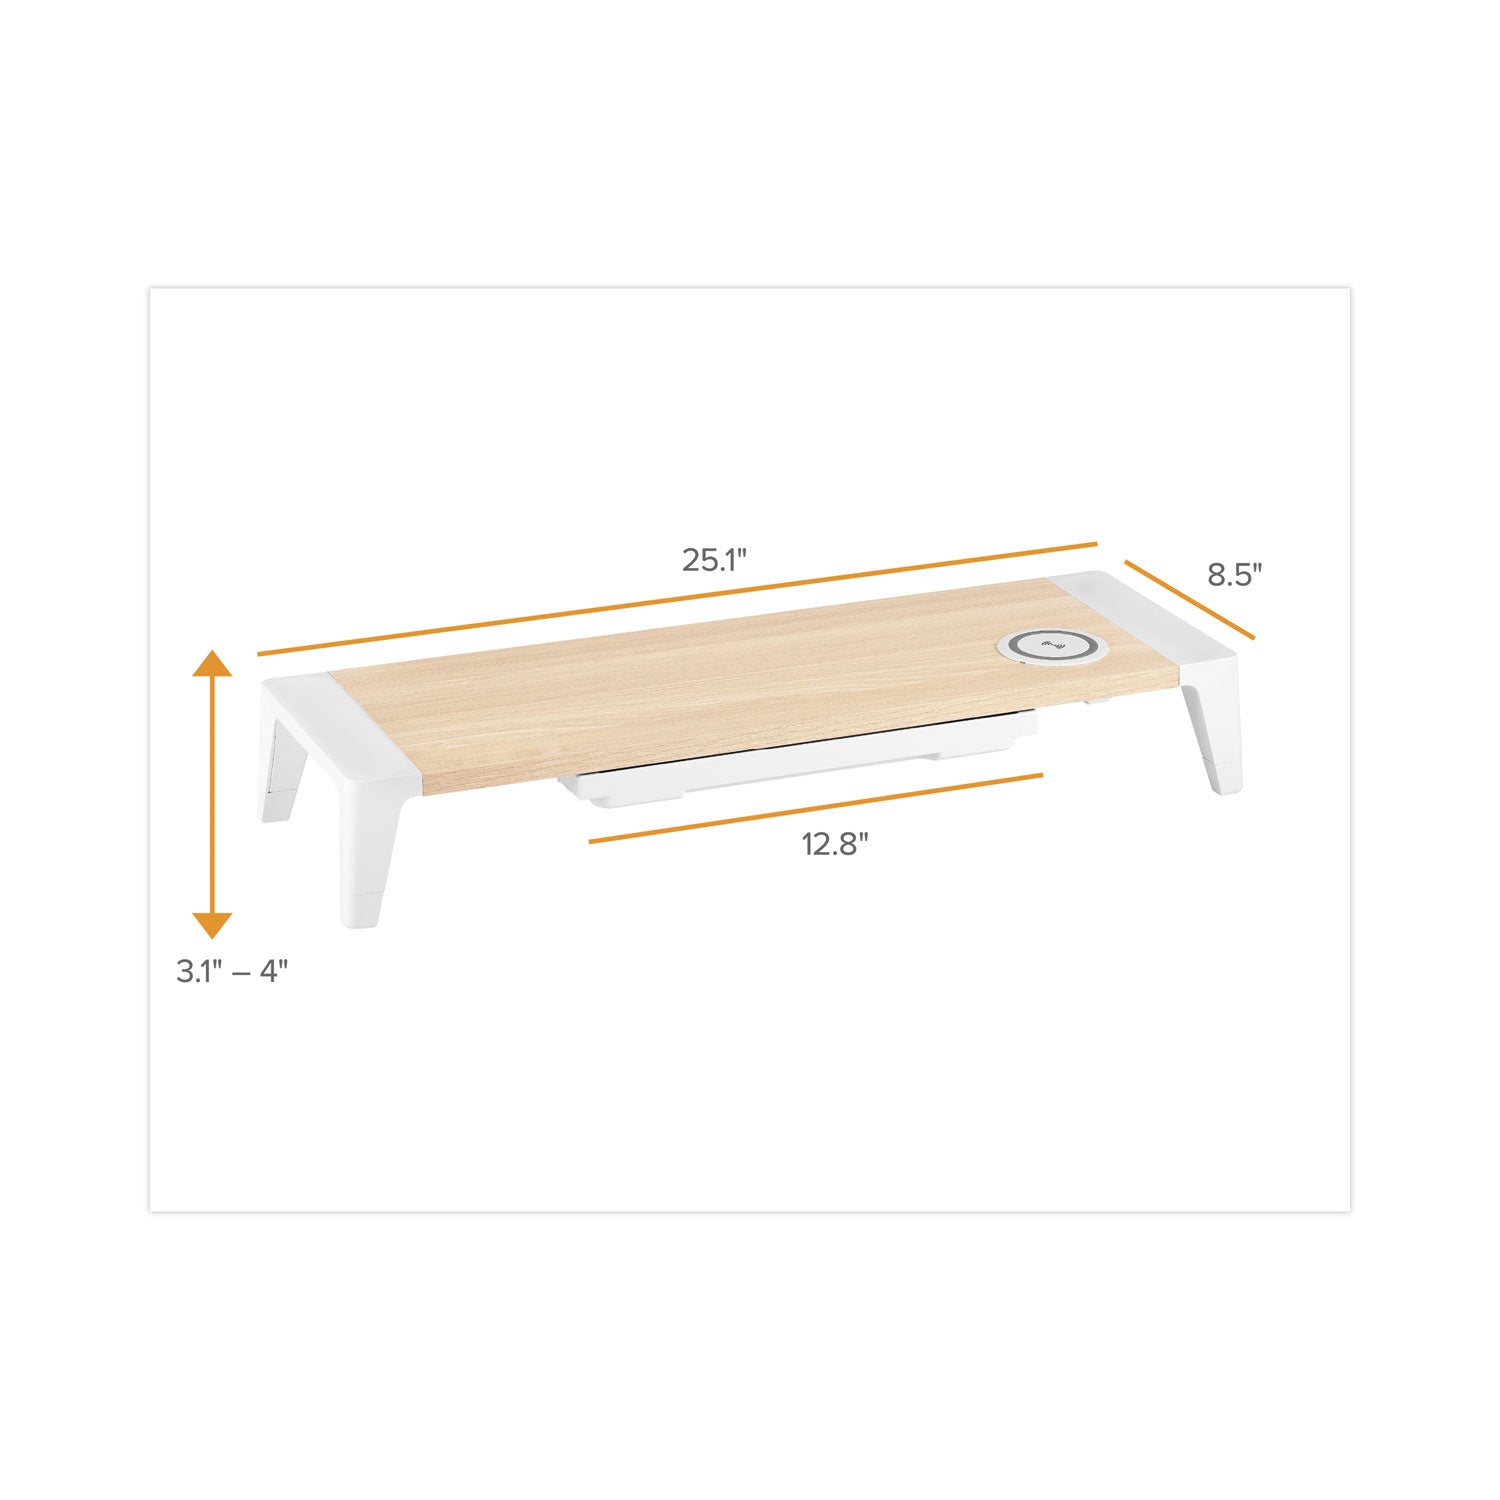 wooden-monitor-stand-with-wireless-charging-pad-98-x-2677-x-413-white_bosstnd2408wh - 6